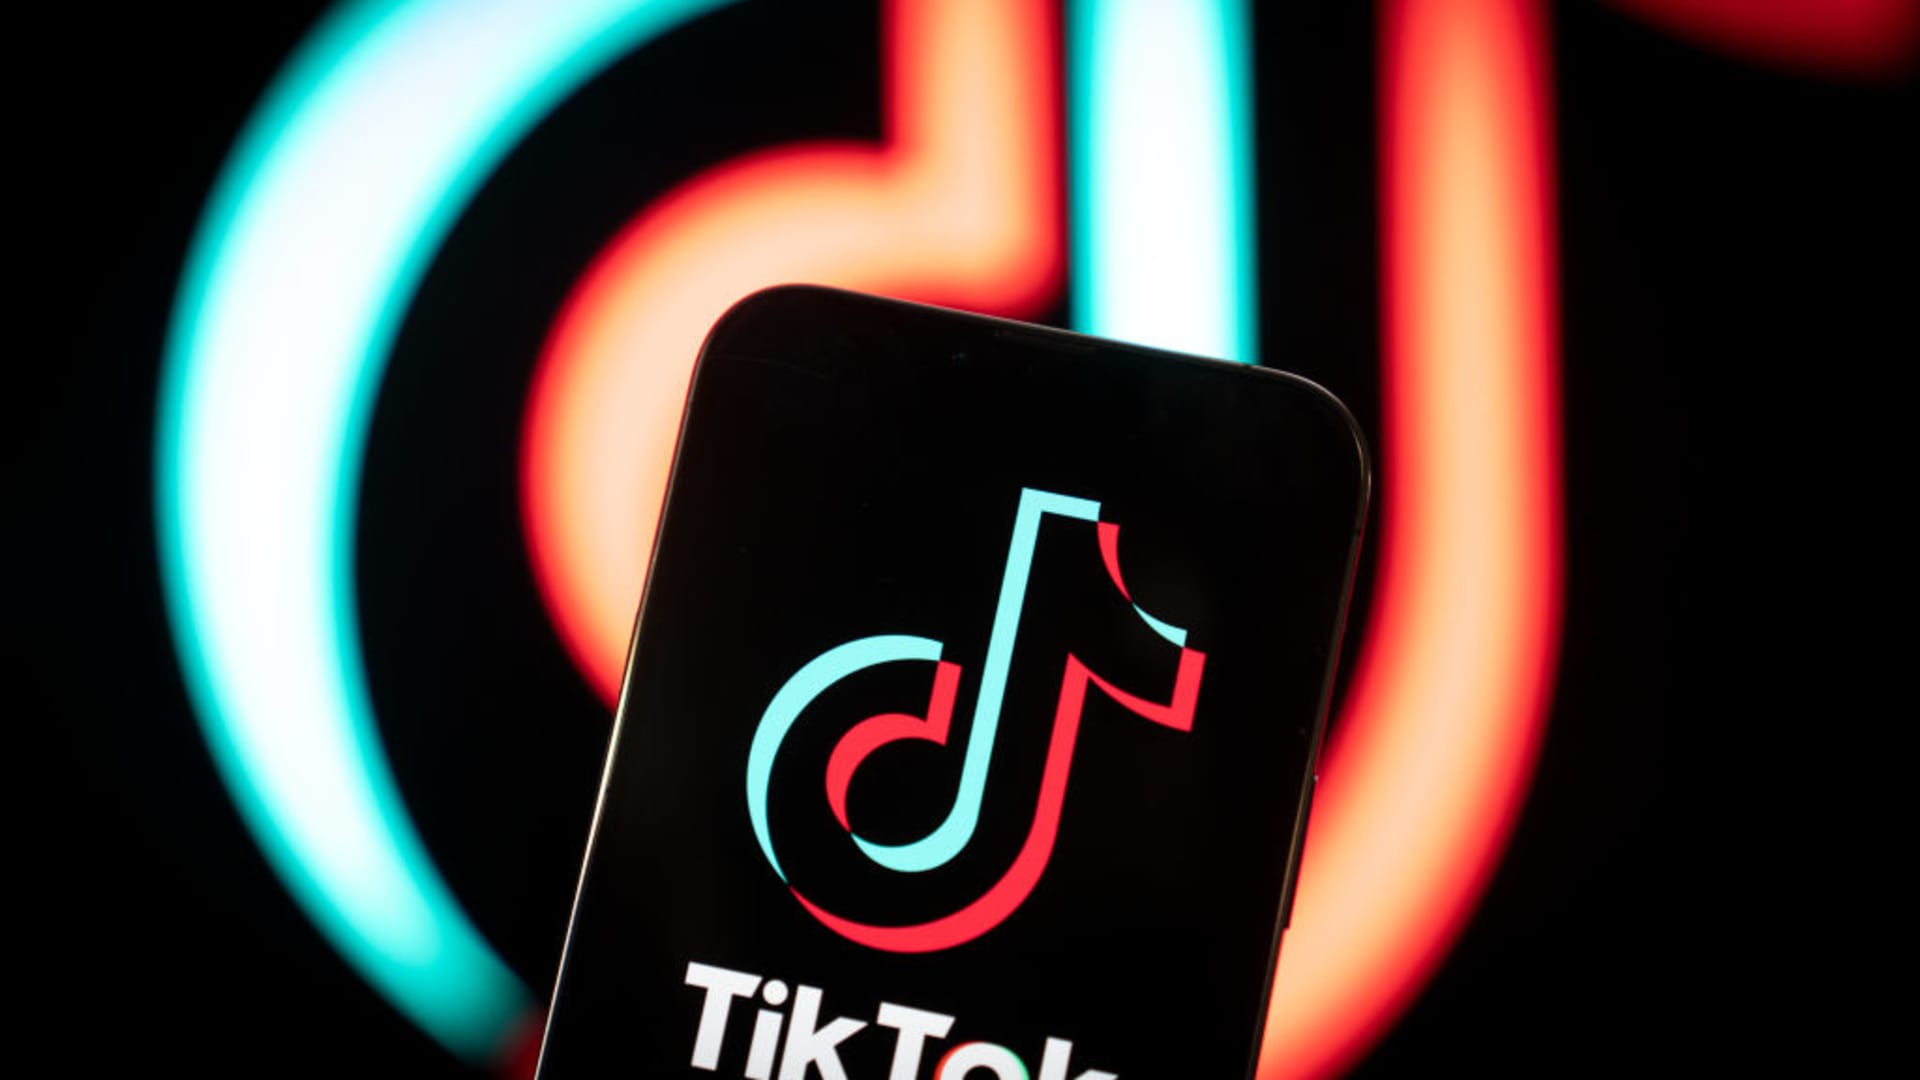 TikTok cuts about 60 jobs as January layoffs continue across tech